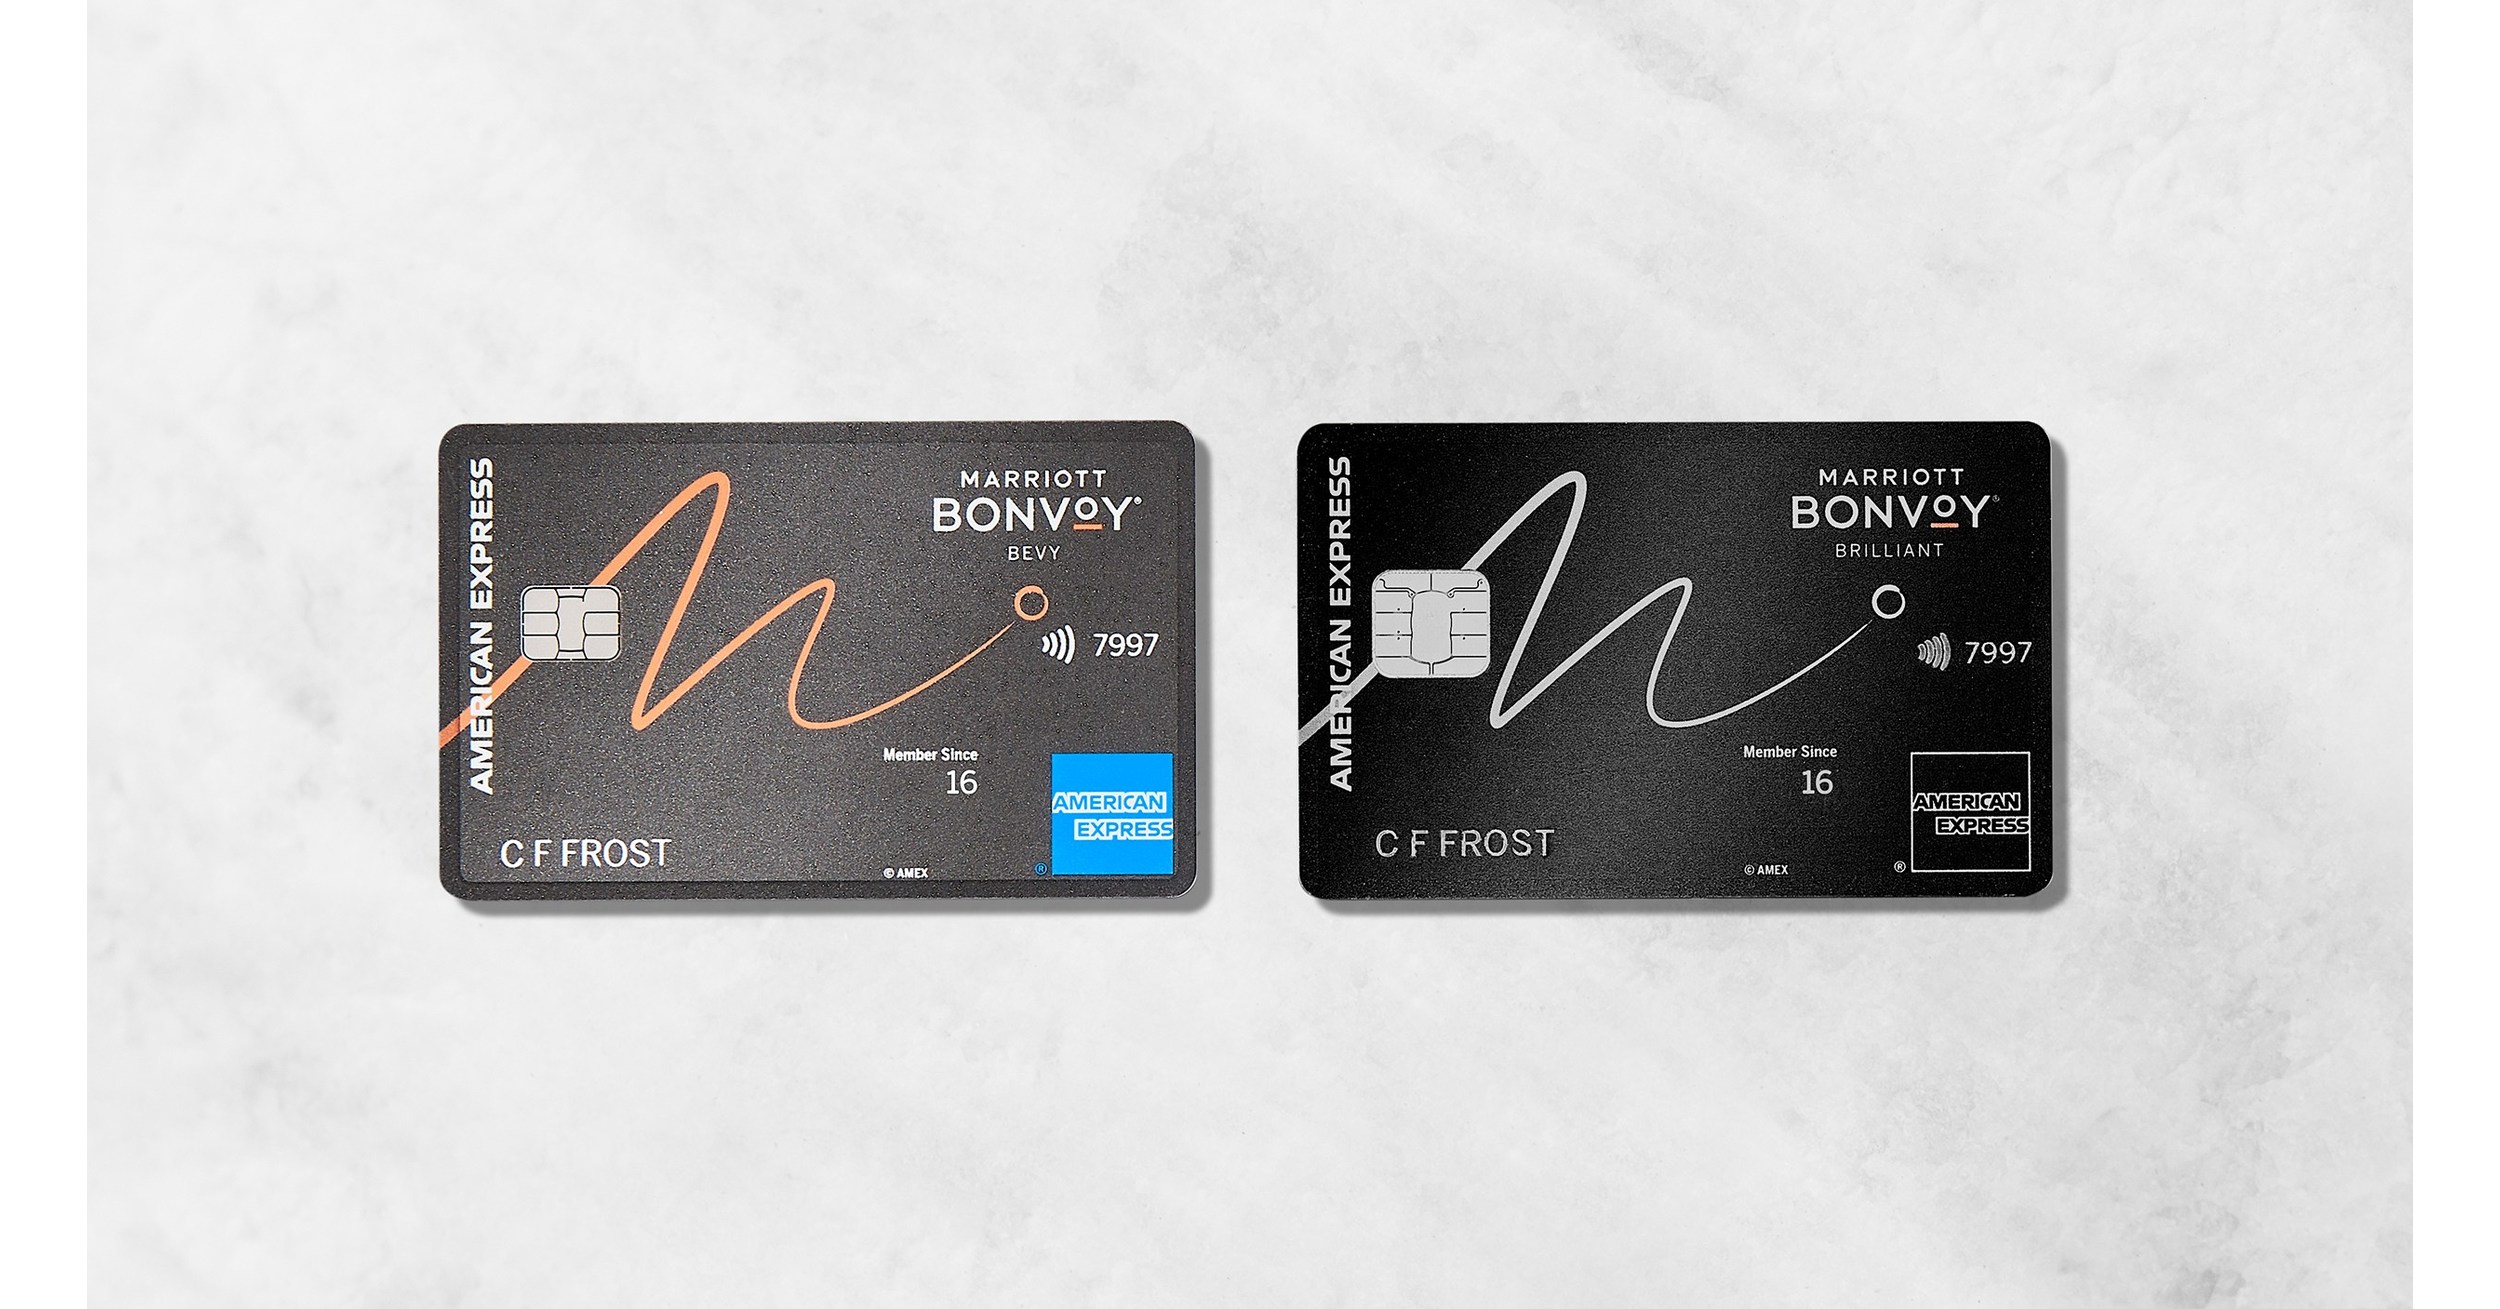 Marriott Bonvoy® Introduces New Cobrand Credit Cards From American Express® And Chase Designed For People Who Live to Travel And Want To Earn Points Faster